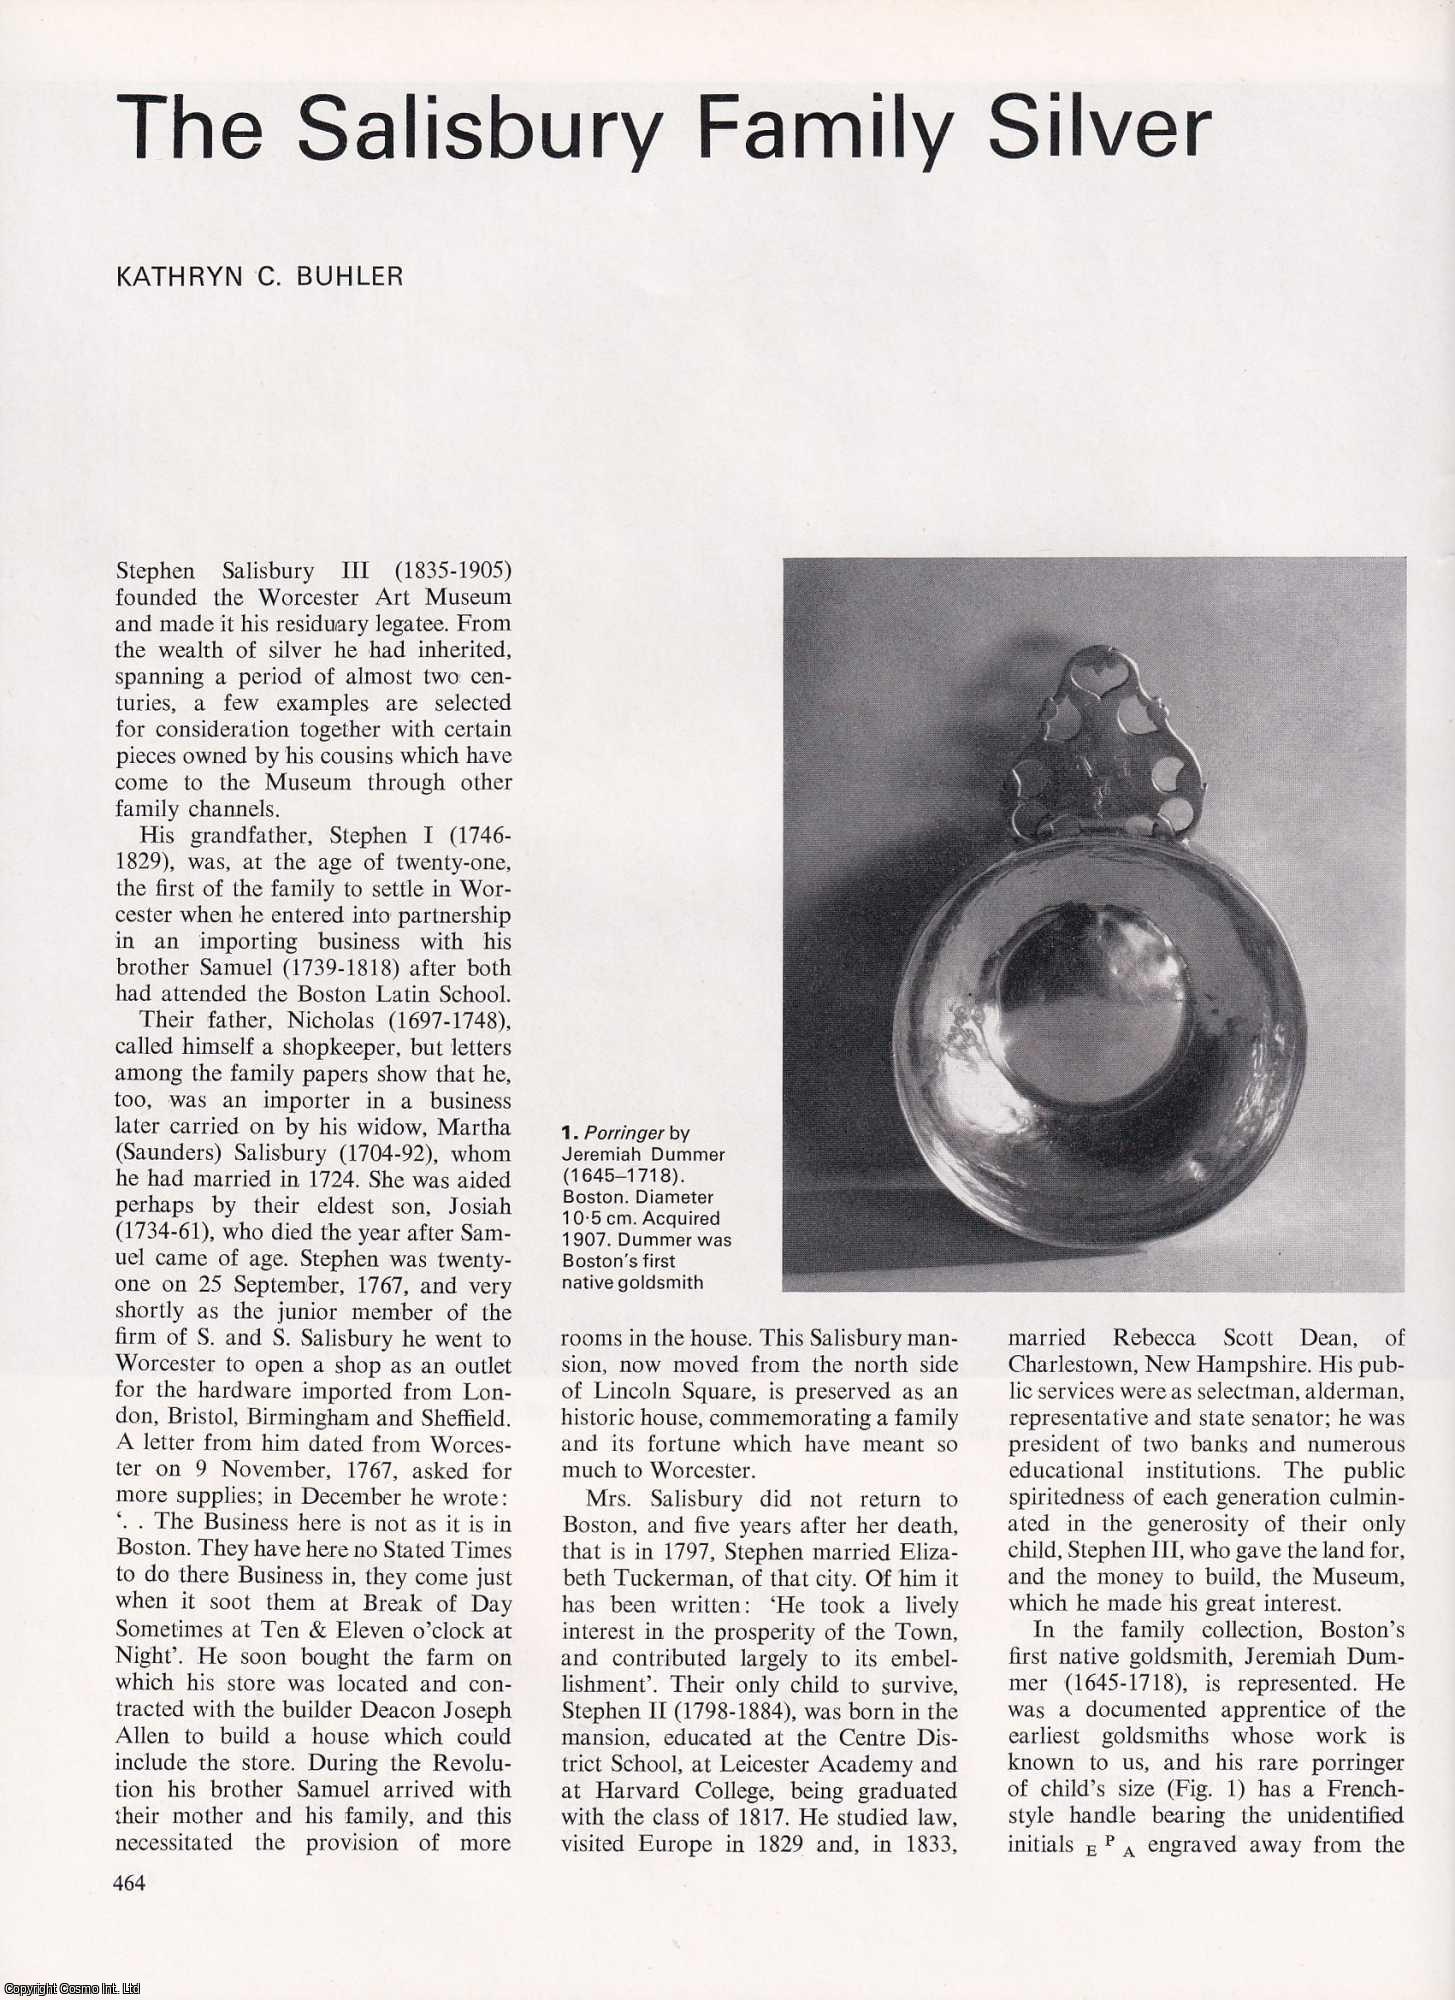 Kathryn C. Buhler - The Salisbury Family Silver, Worcester Art Museum, Massachusetts. An uncommon original article from Apollo, the Magazine of the Arts, 1971.